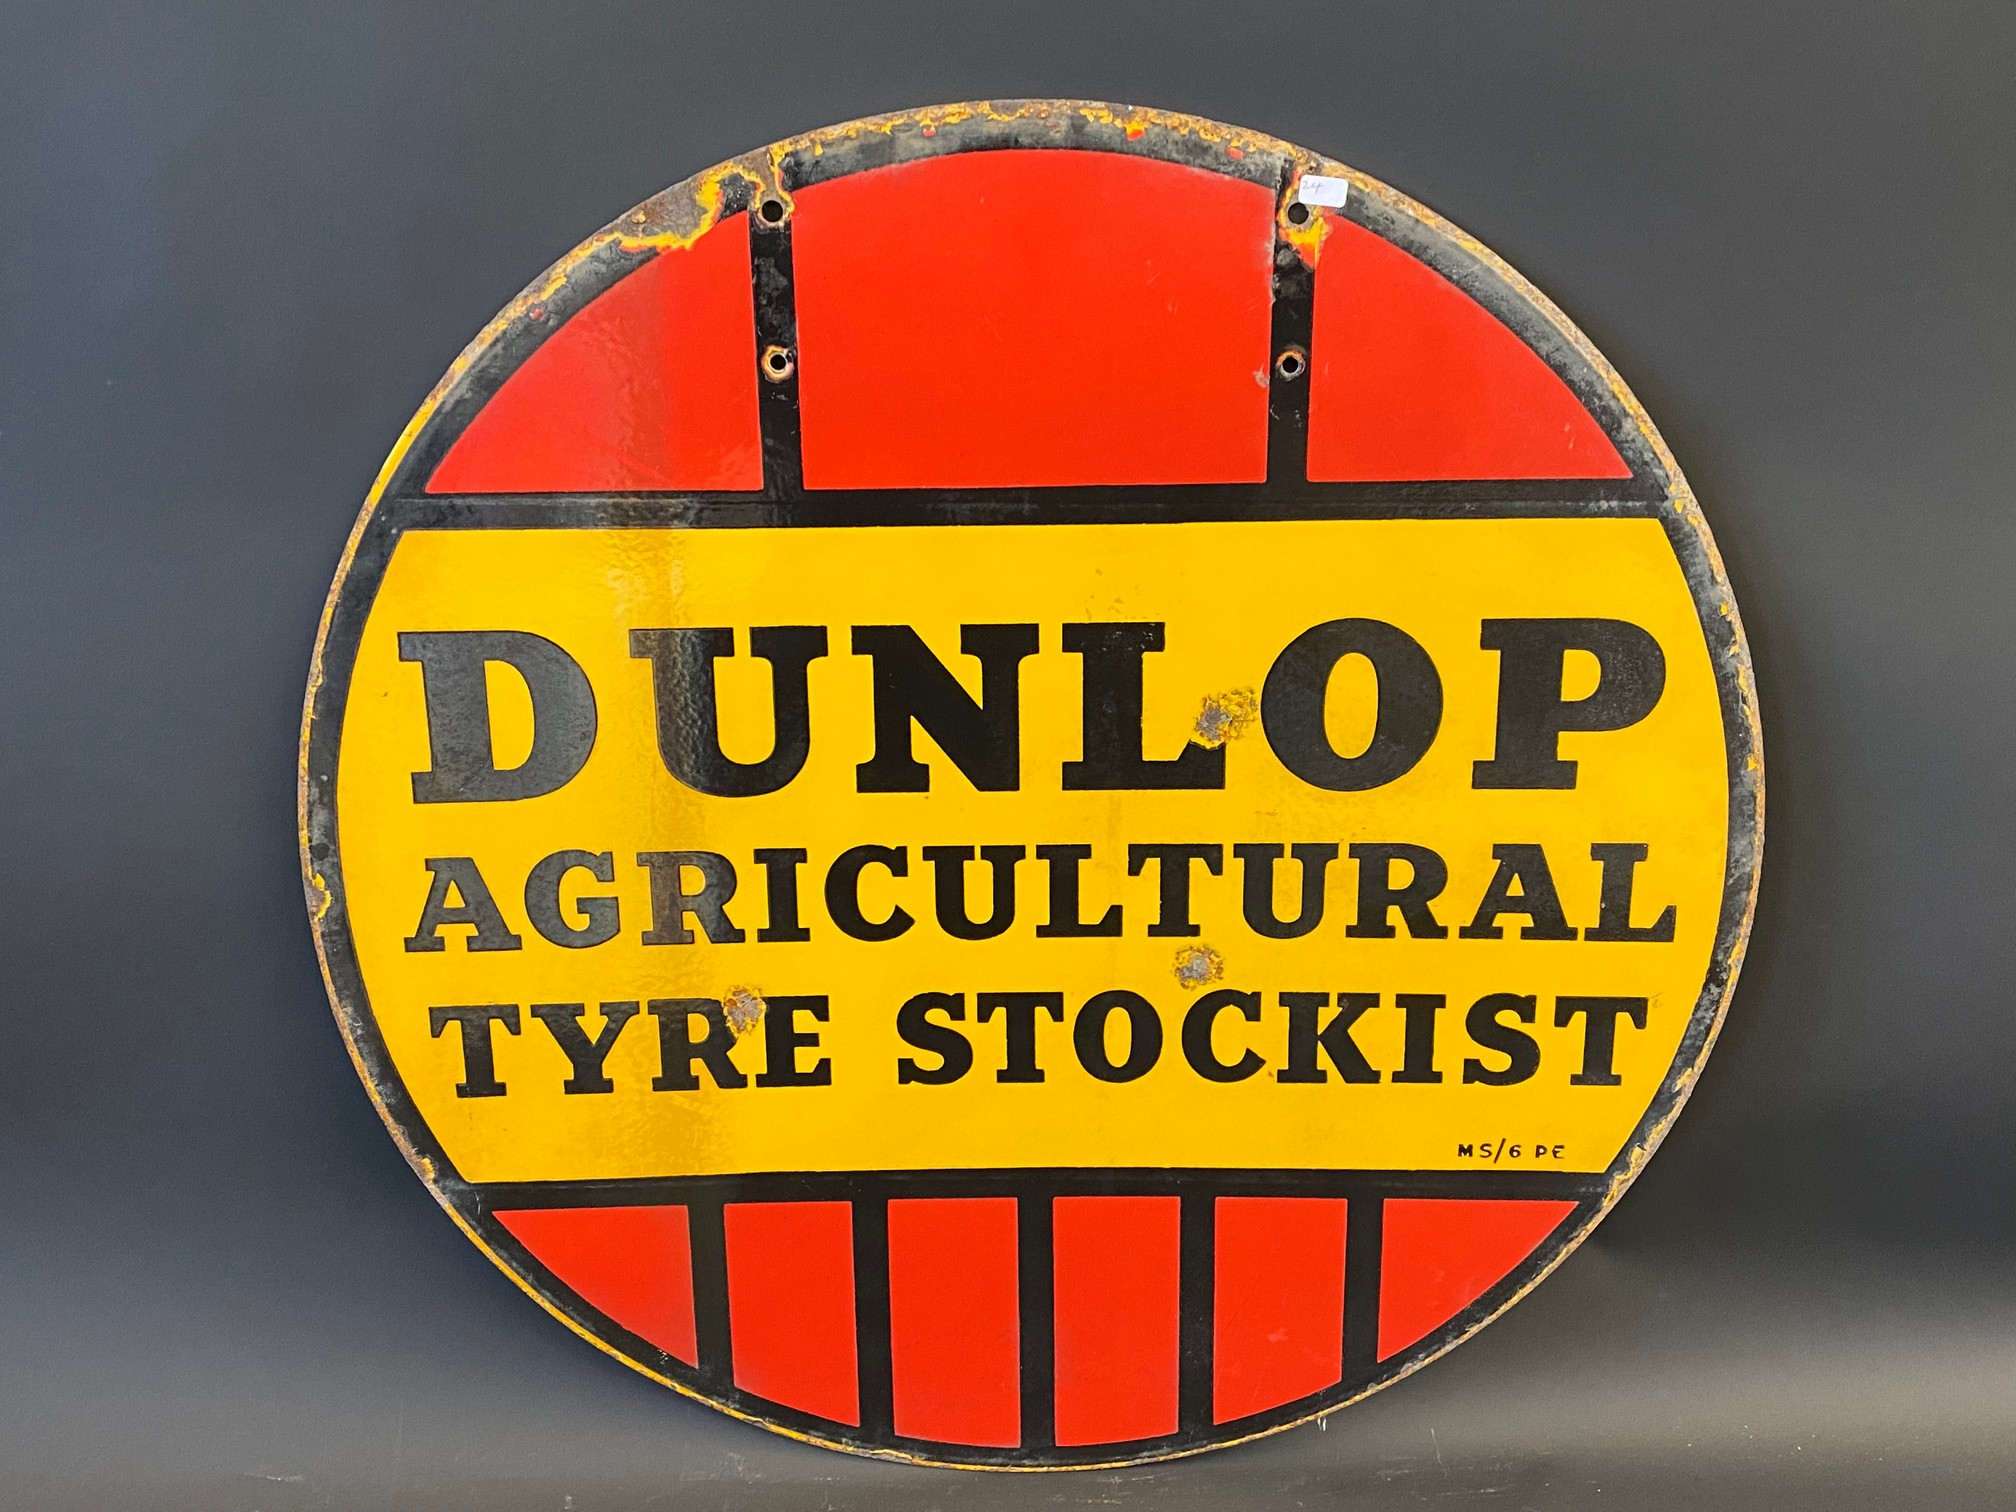 A Dunlop Agricultural Tyre Stockist circular double sided enamel sign, 24" diameter.